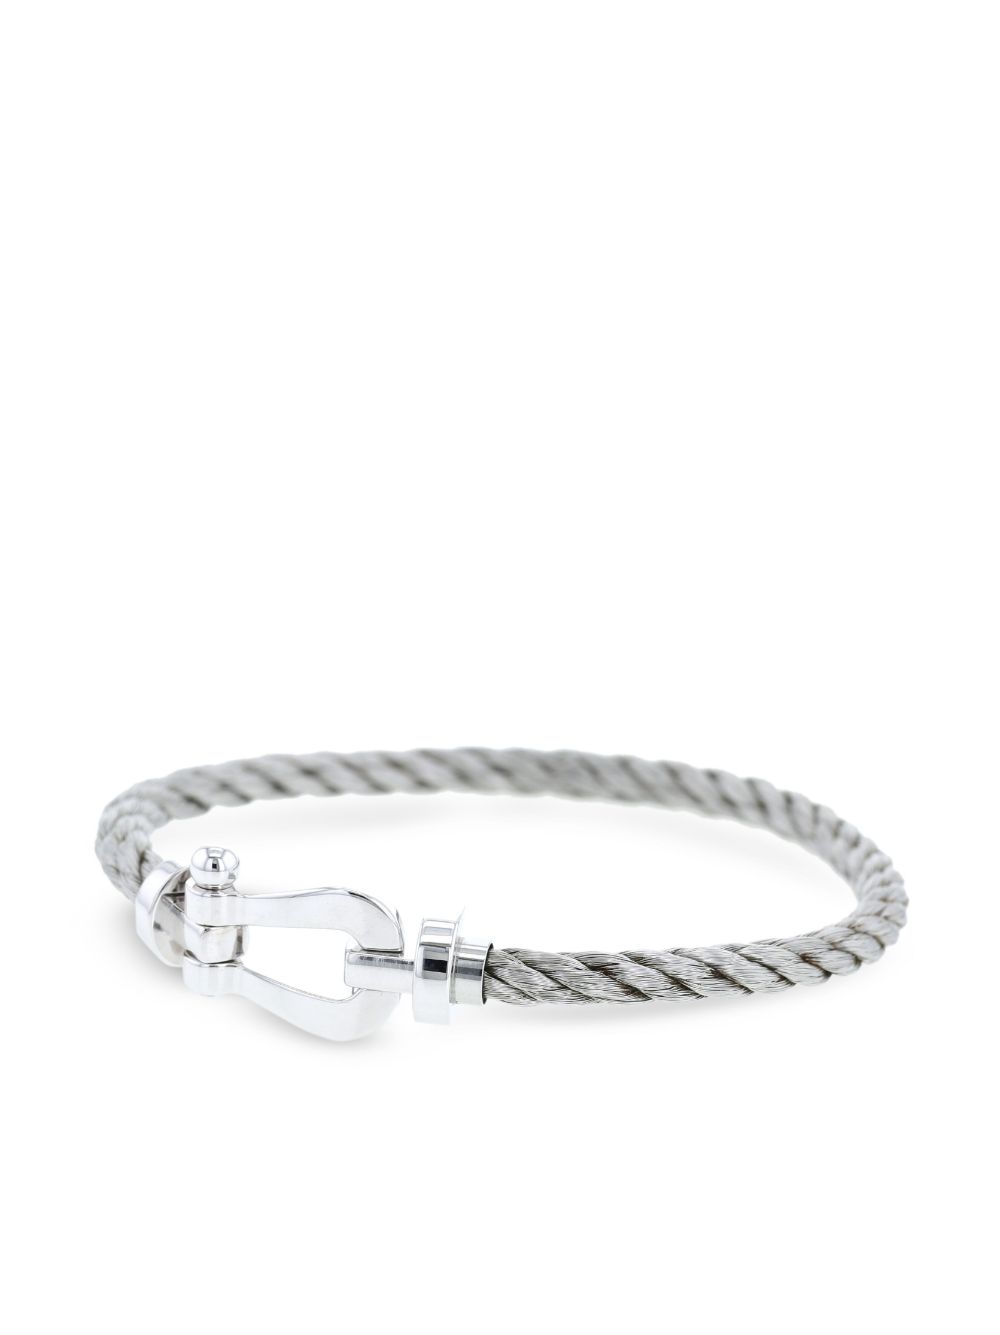 Fred 2020s white gold and stainless steel bracelet - Zilver